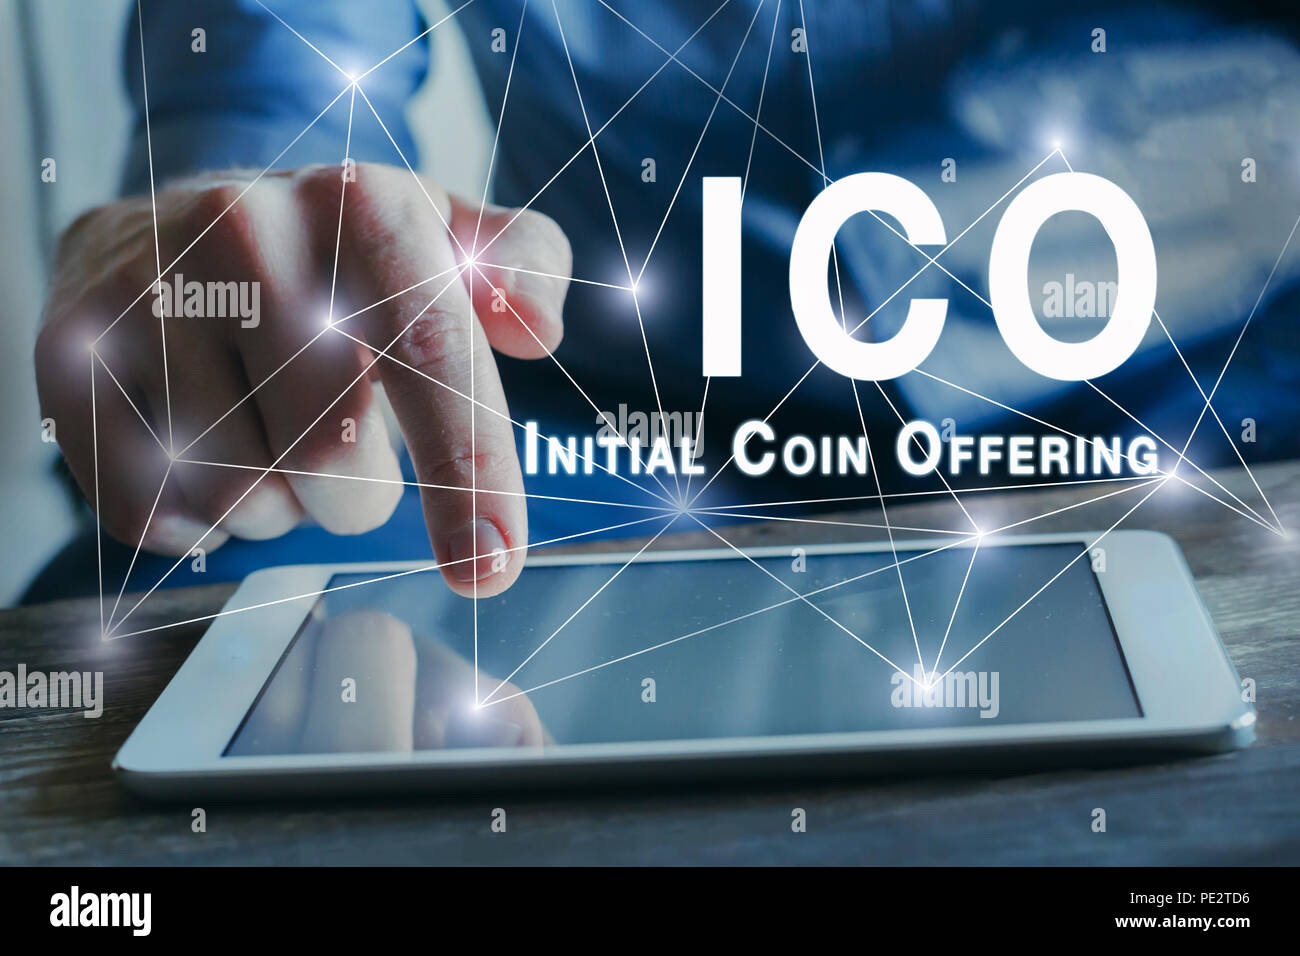 ICO concept, initial coin offering, digital money crypto currency Stock Photo